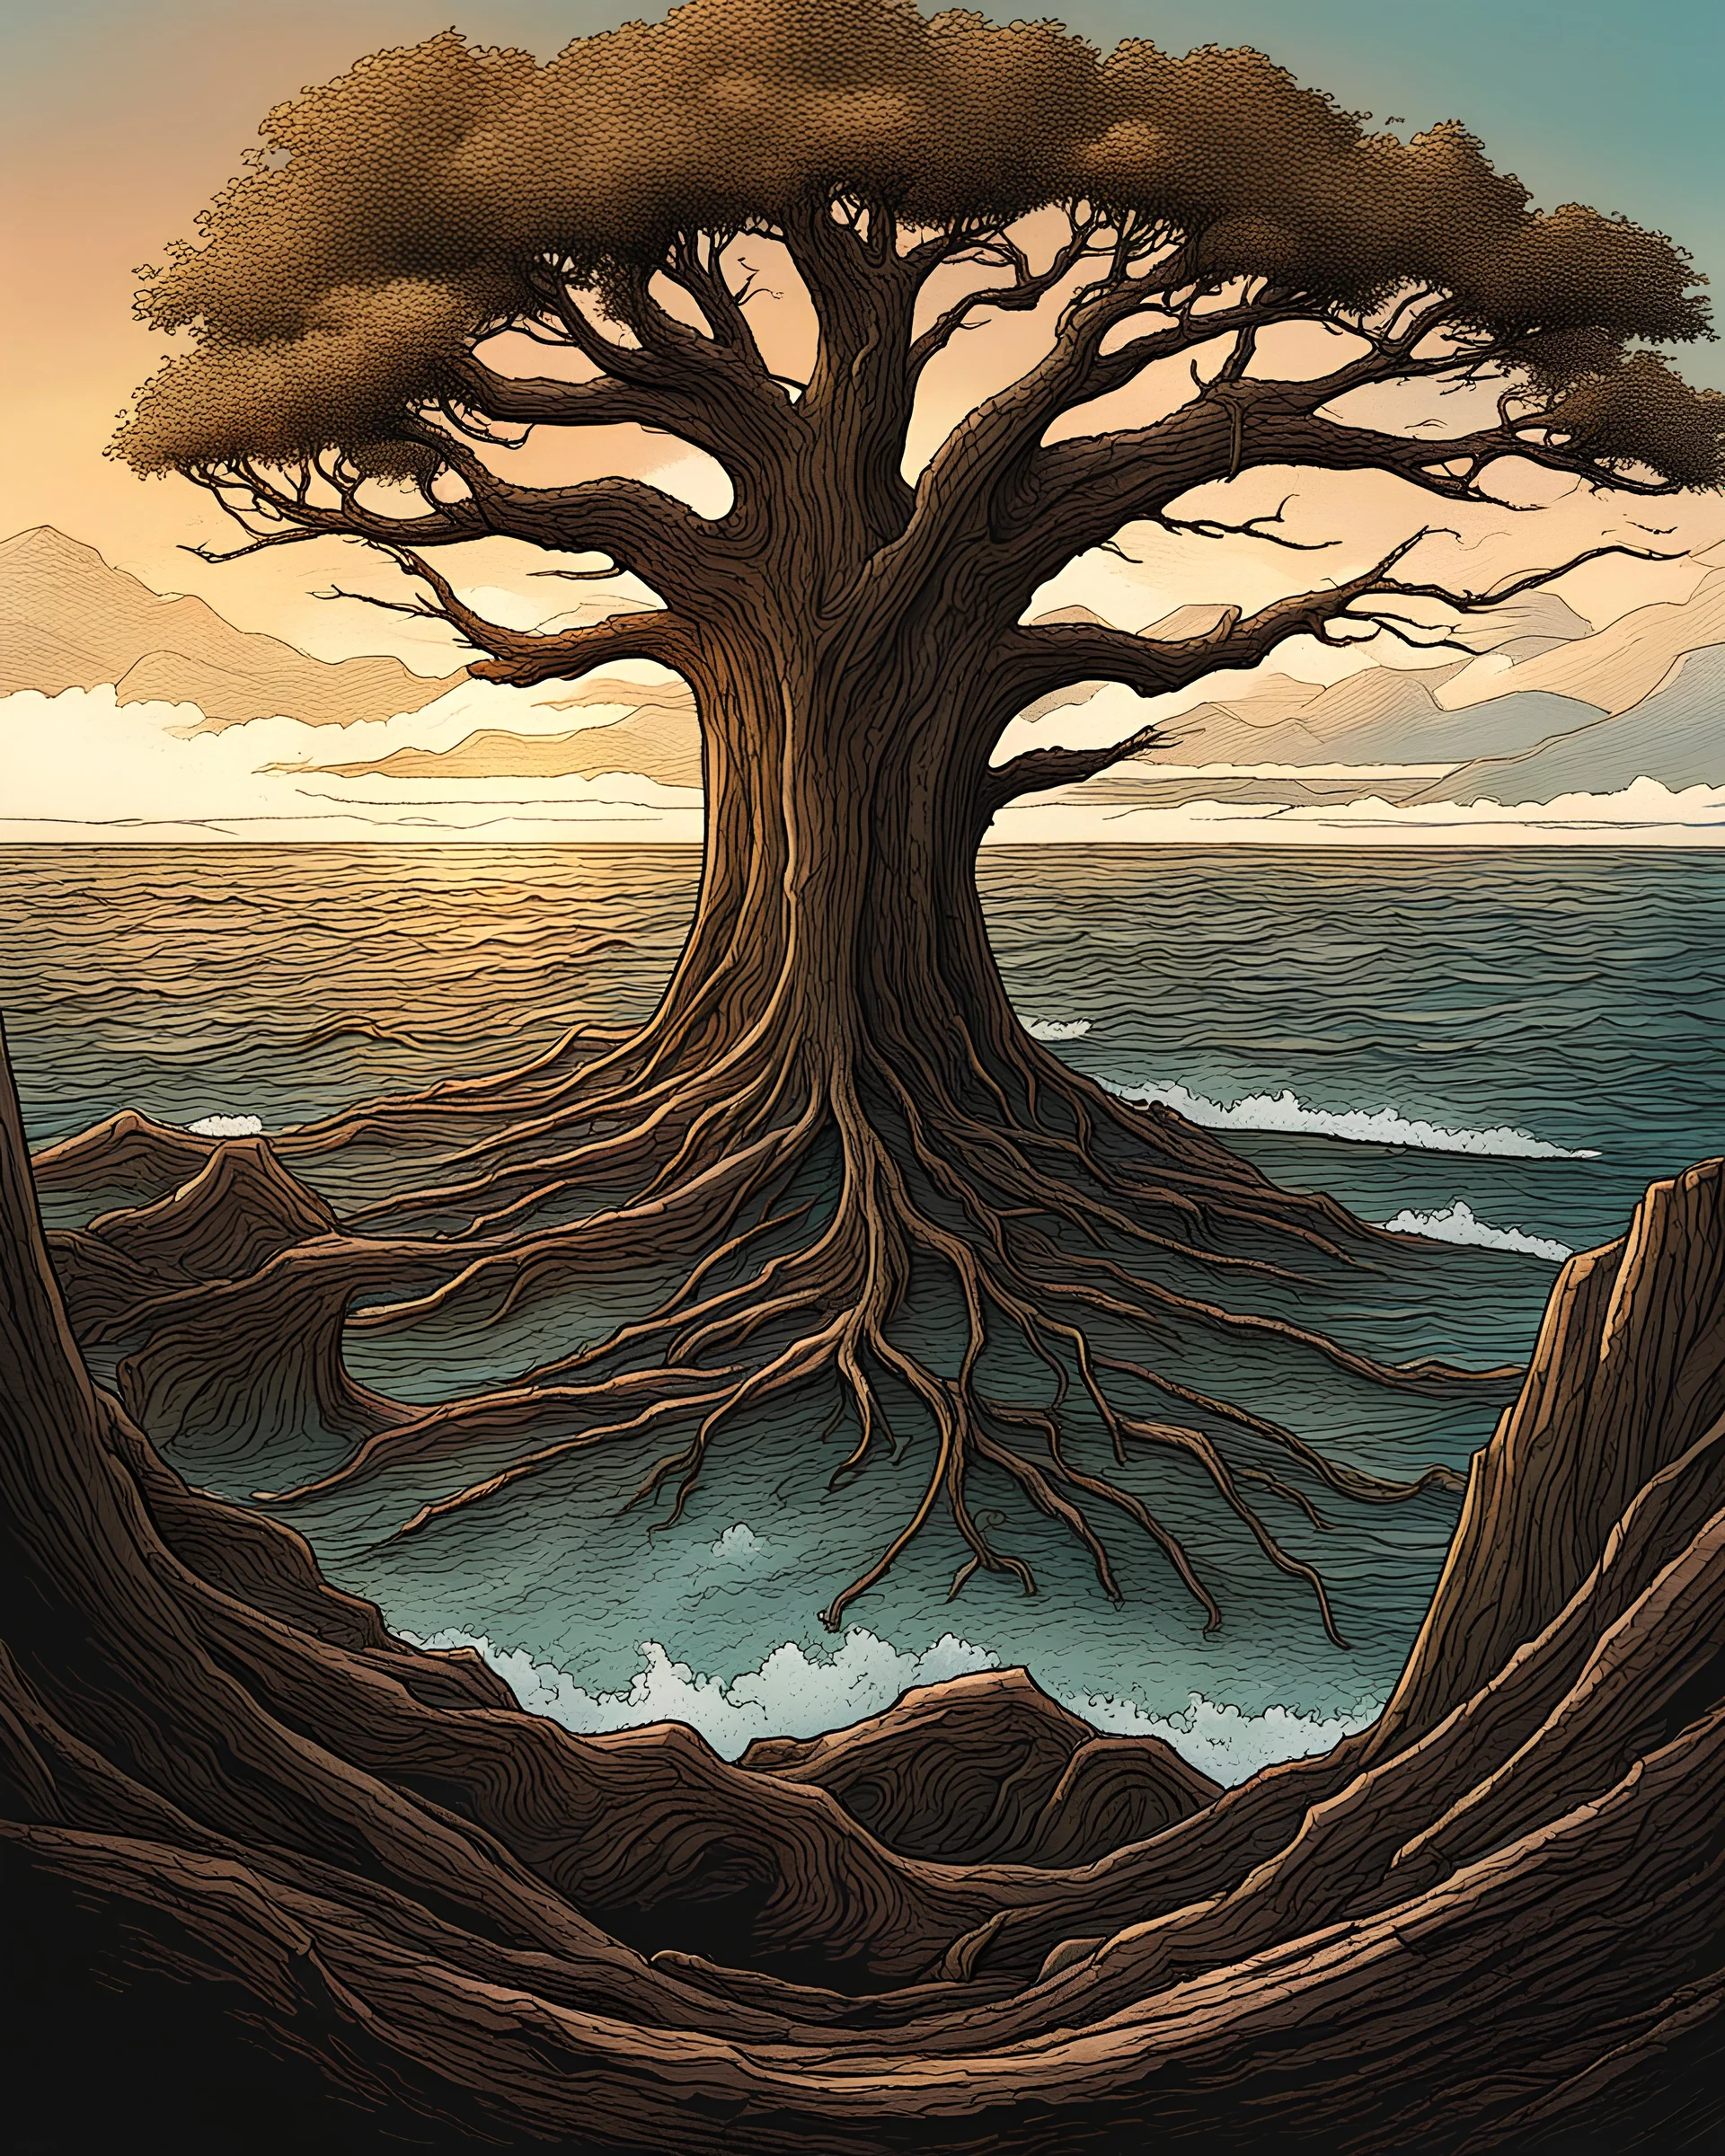 a great tree trunk takes up the majority of the screen. It is surrounded by ocean, which pours into the center of the charred wooden flesh. There are no mountains or other trees surrounding it, and there are no leaves